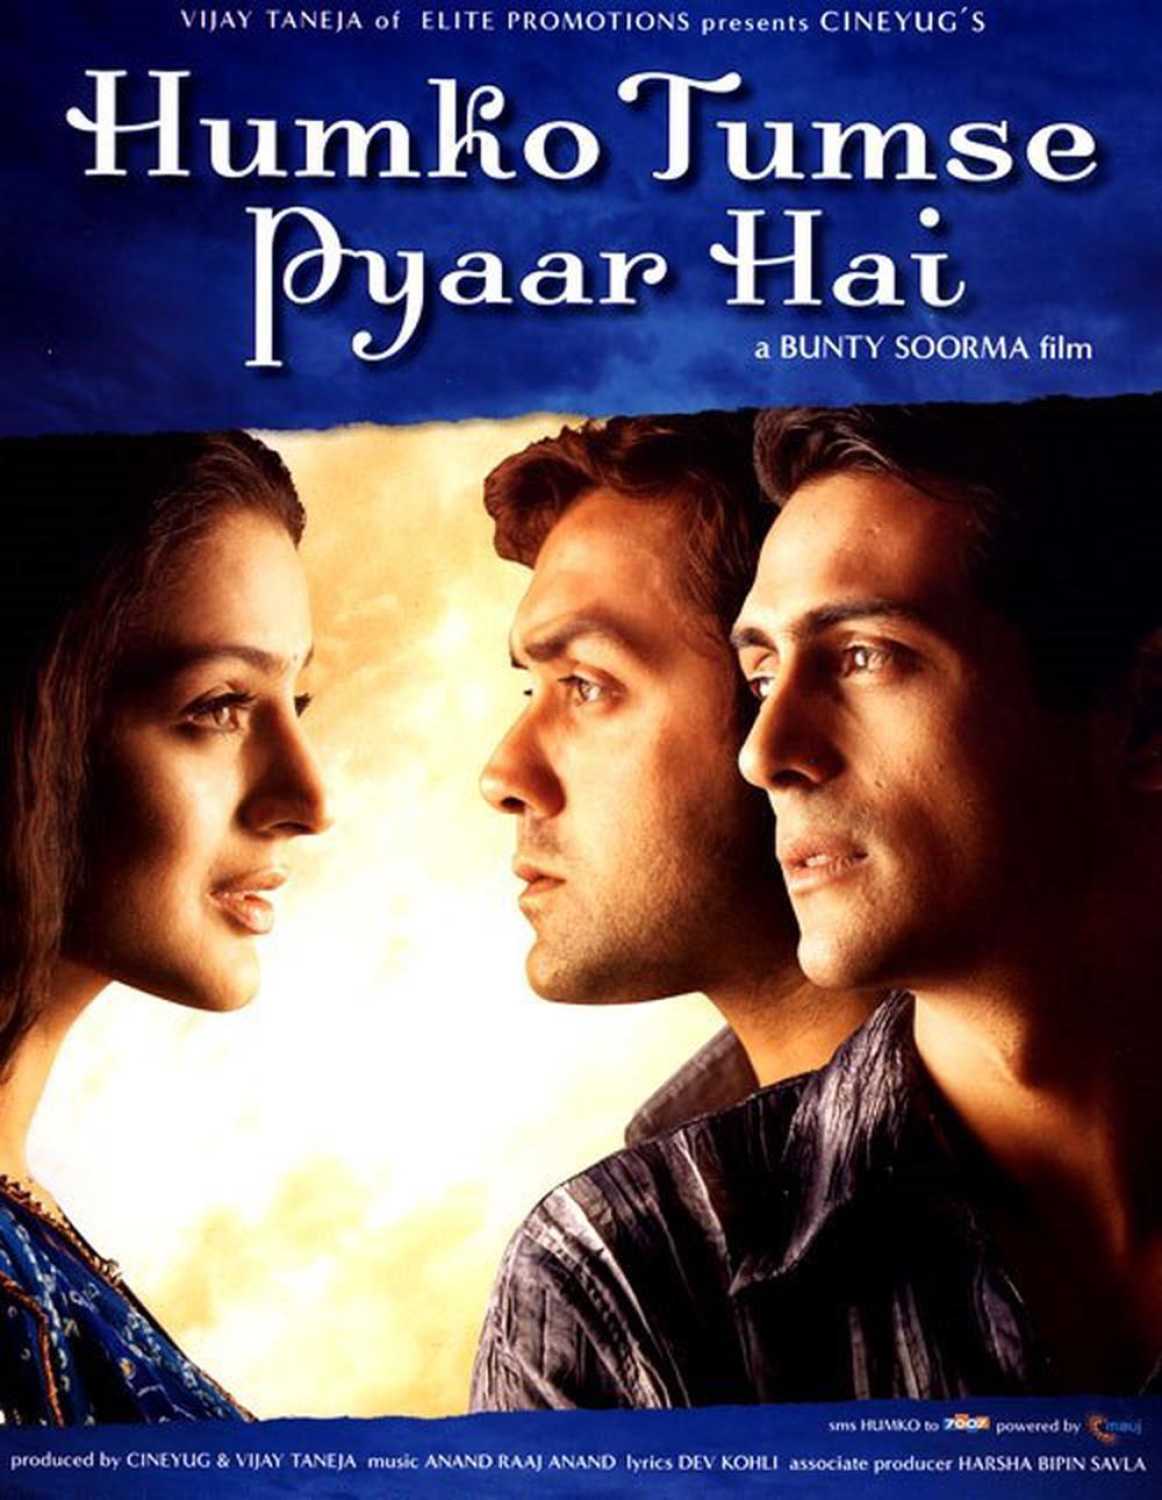 Poster for the movie "Humko Tumse Pyaar Hai"